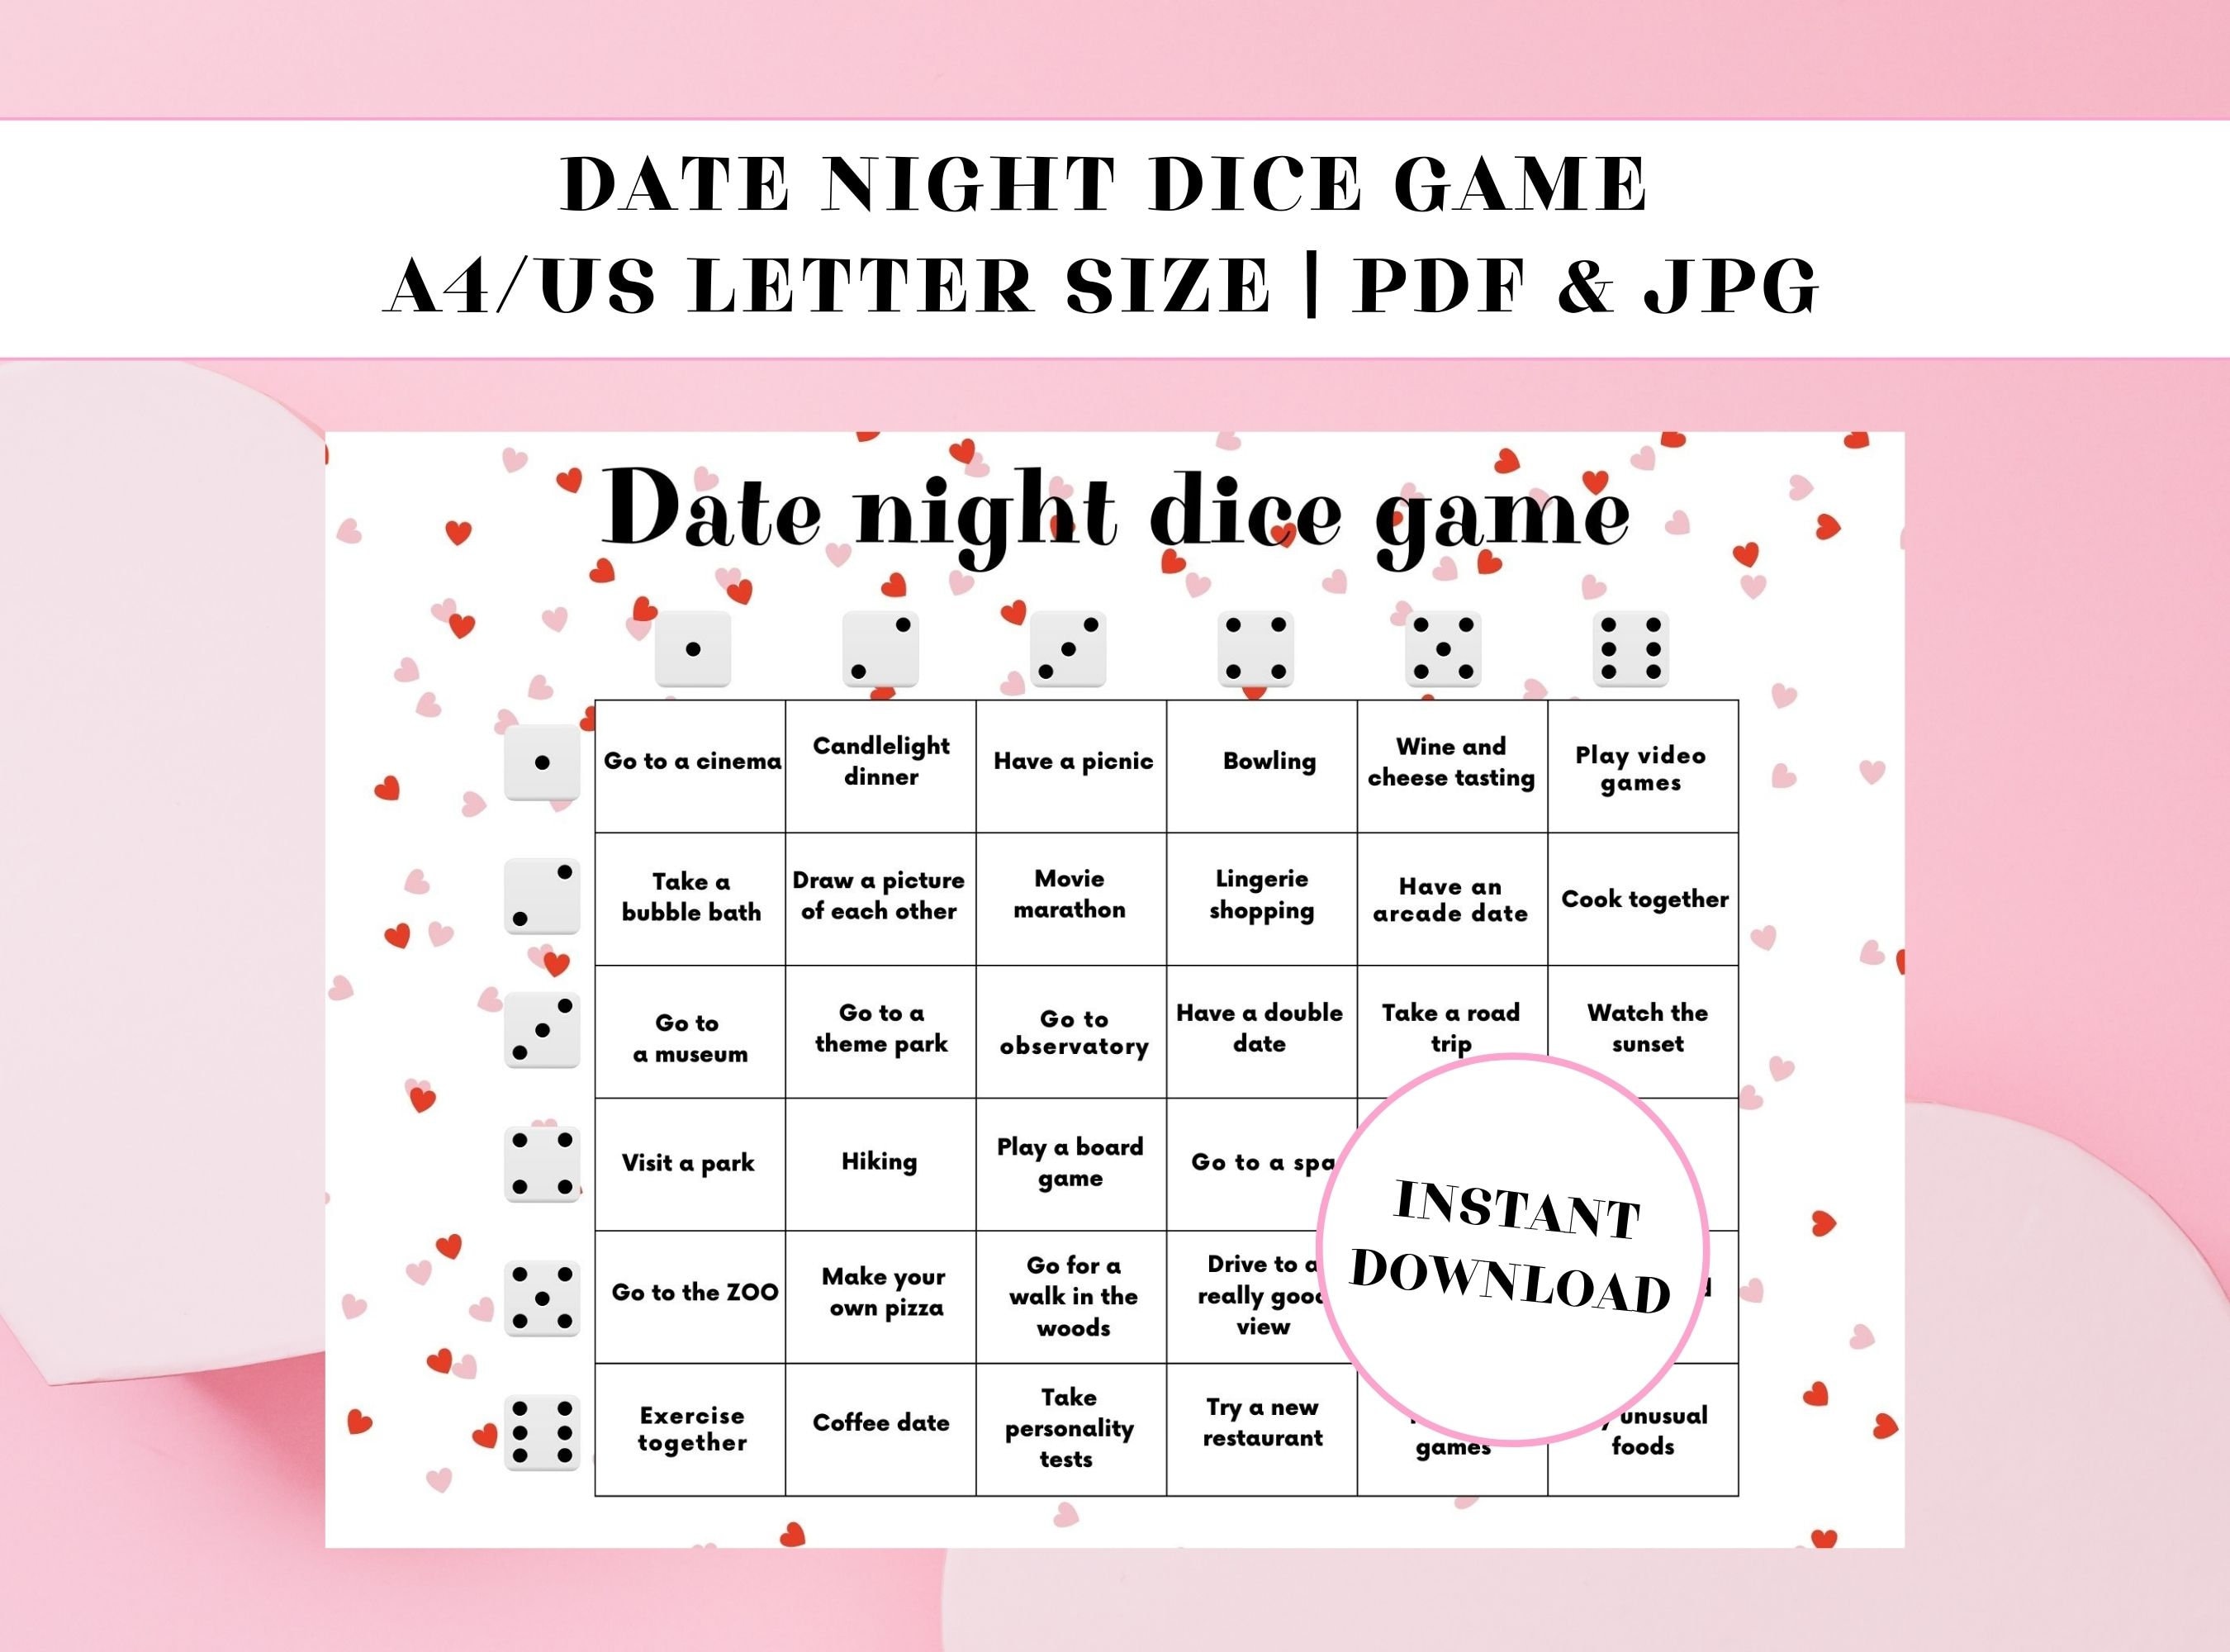 Printable Couple Games Bundle and Dice I Date Night Games for 